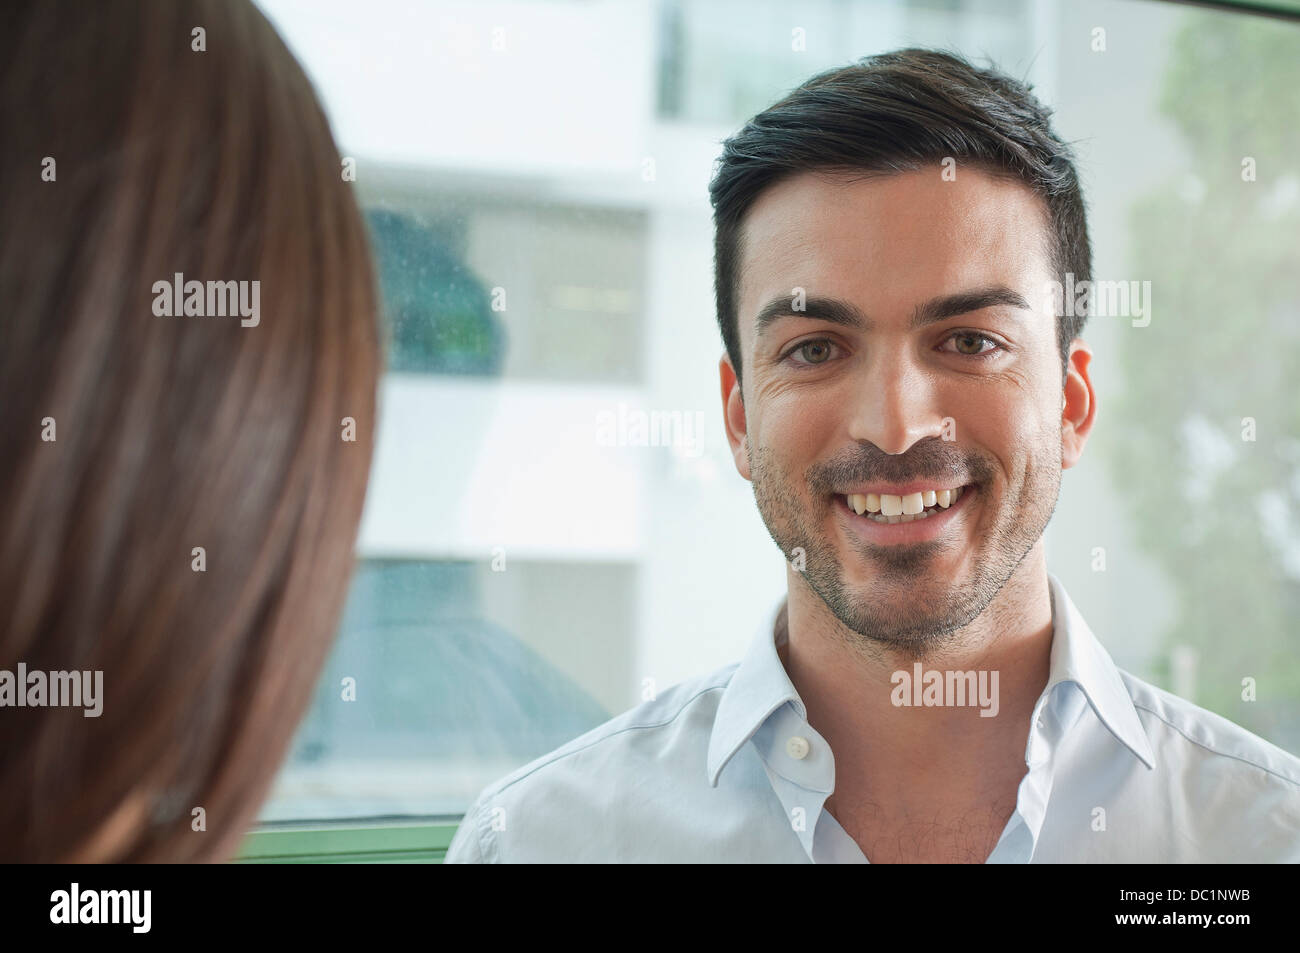 Portrait of smiling young male office worker Banque D'Images